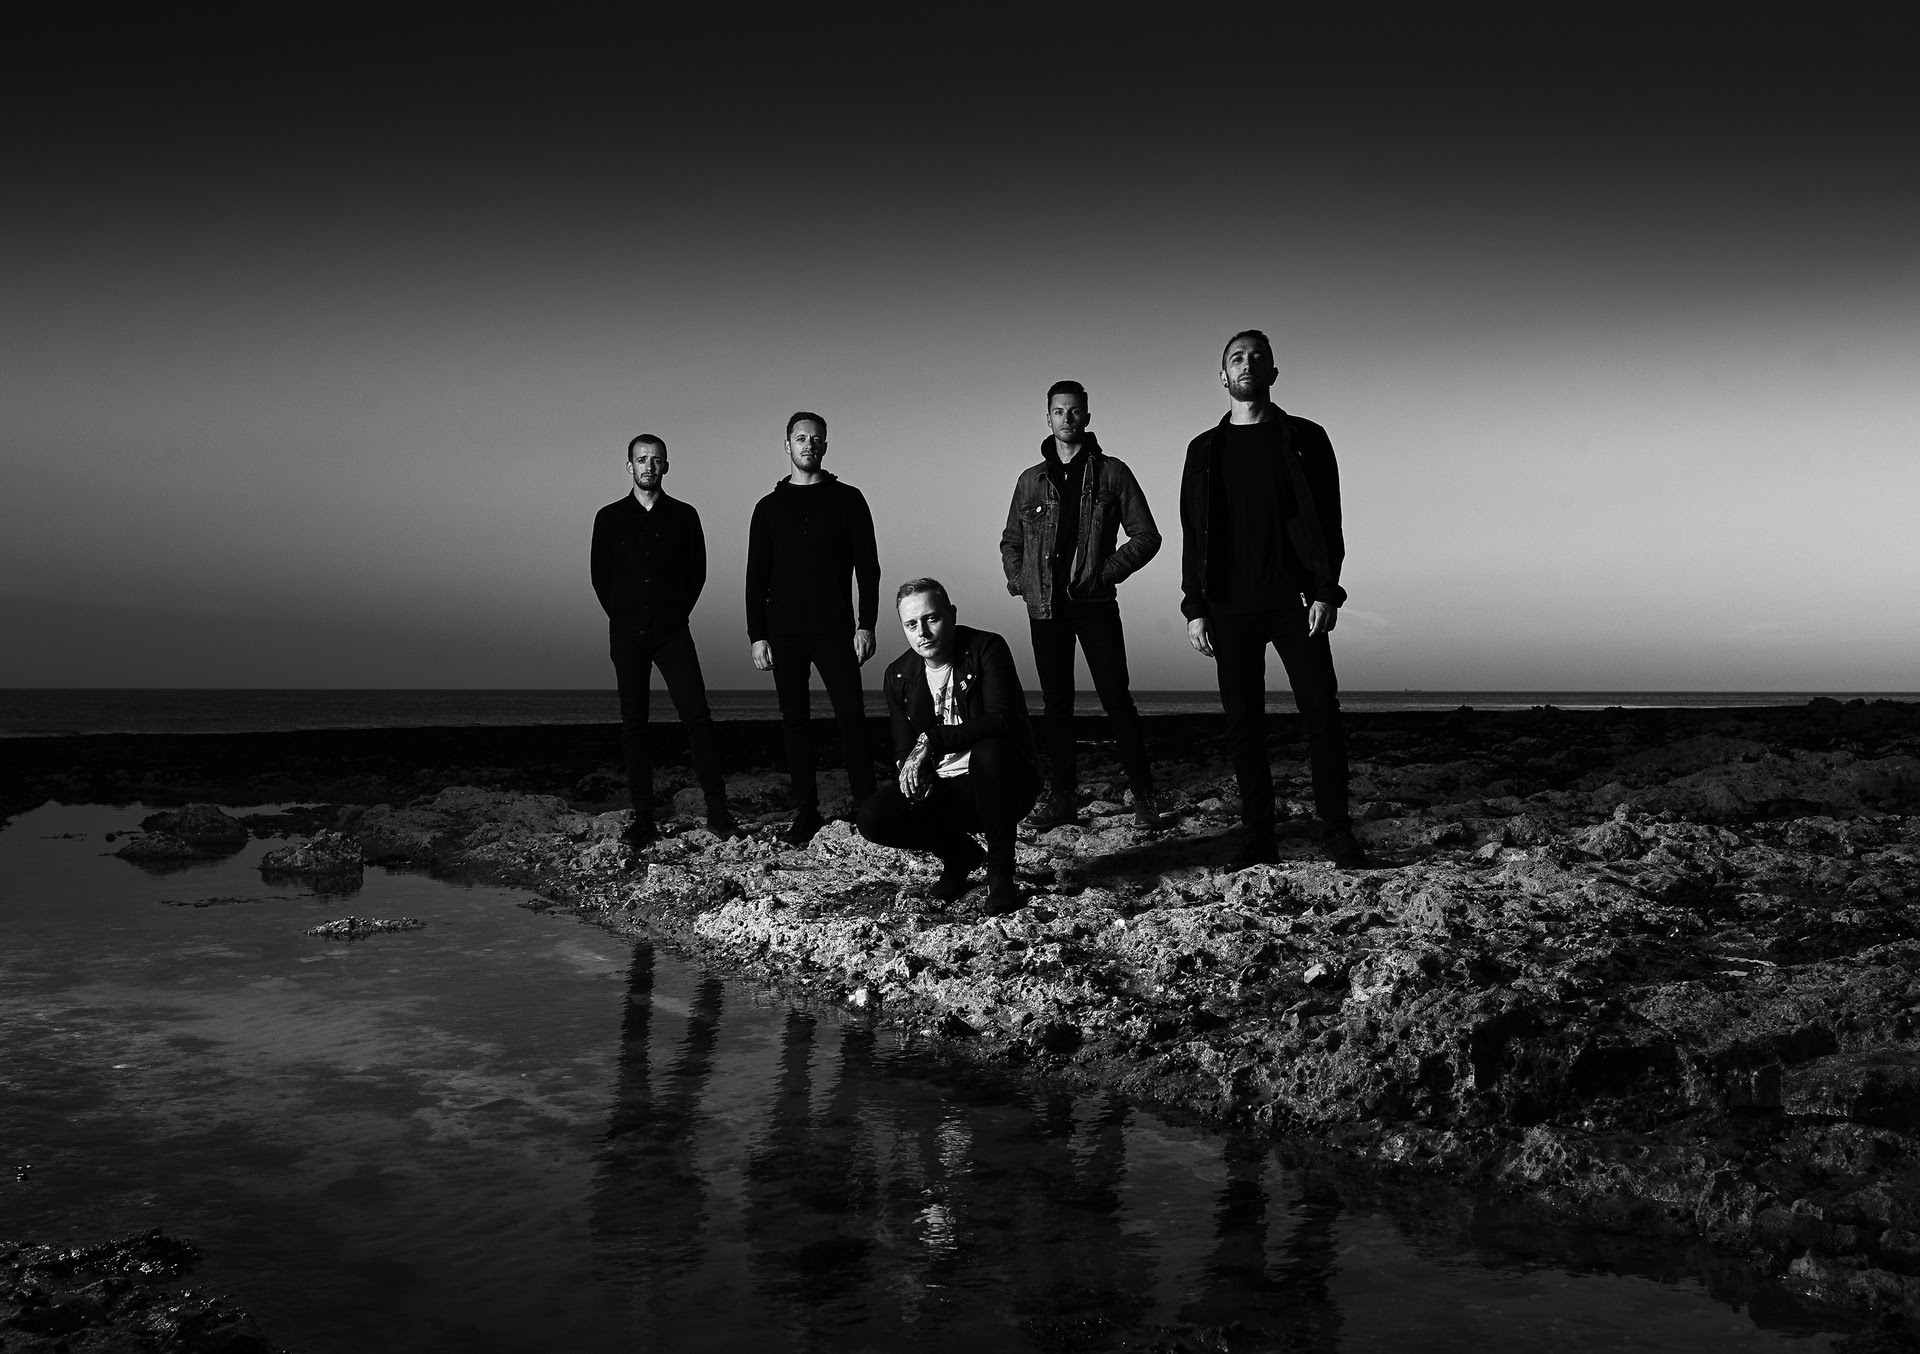 Architects premiere “Modern Misery” music video